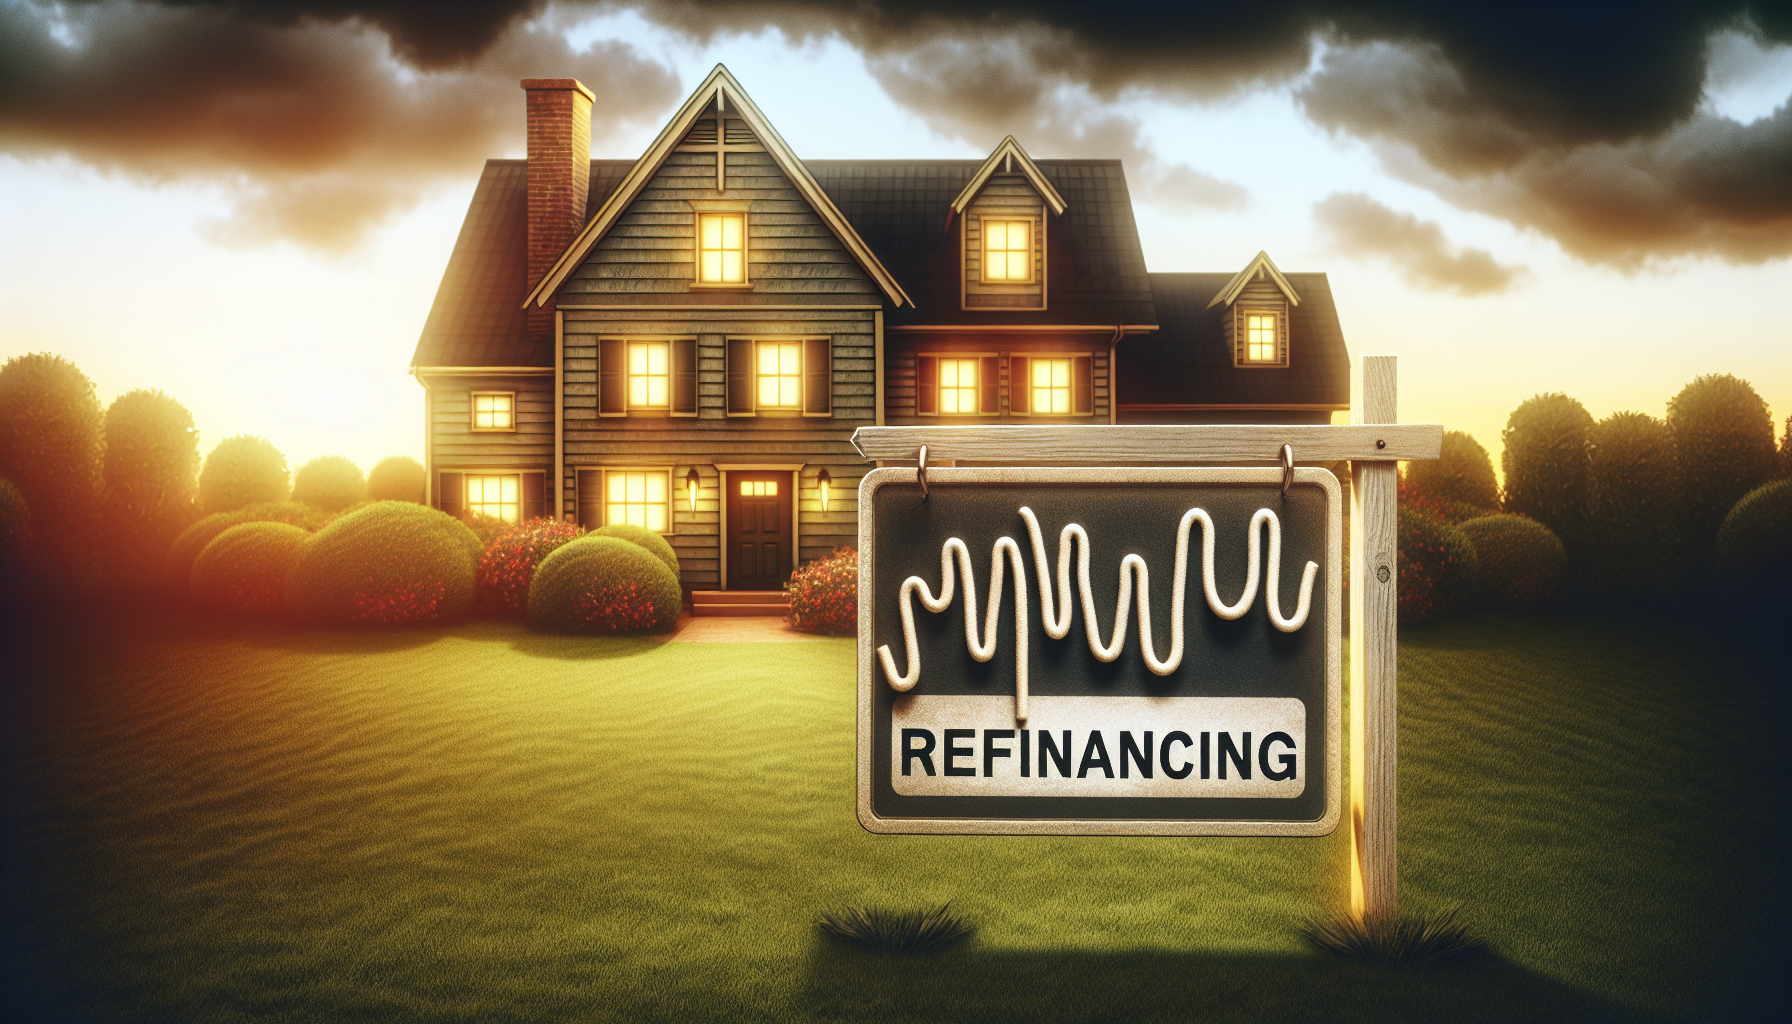 Illustration of a house with a refinance sign indicating refinancing the mortgage